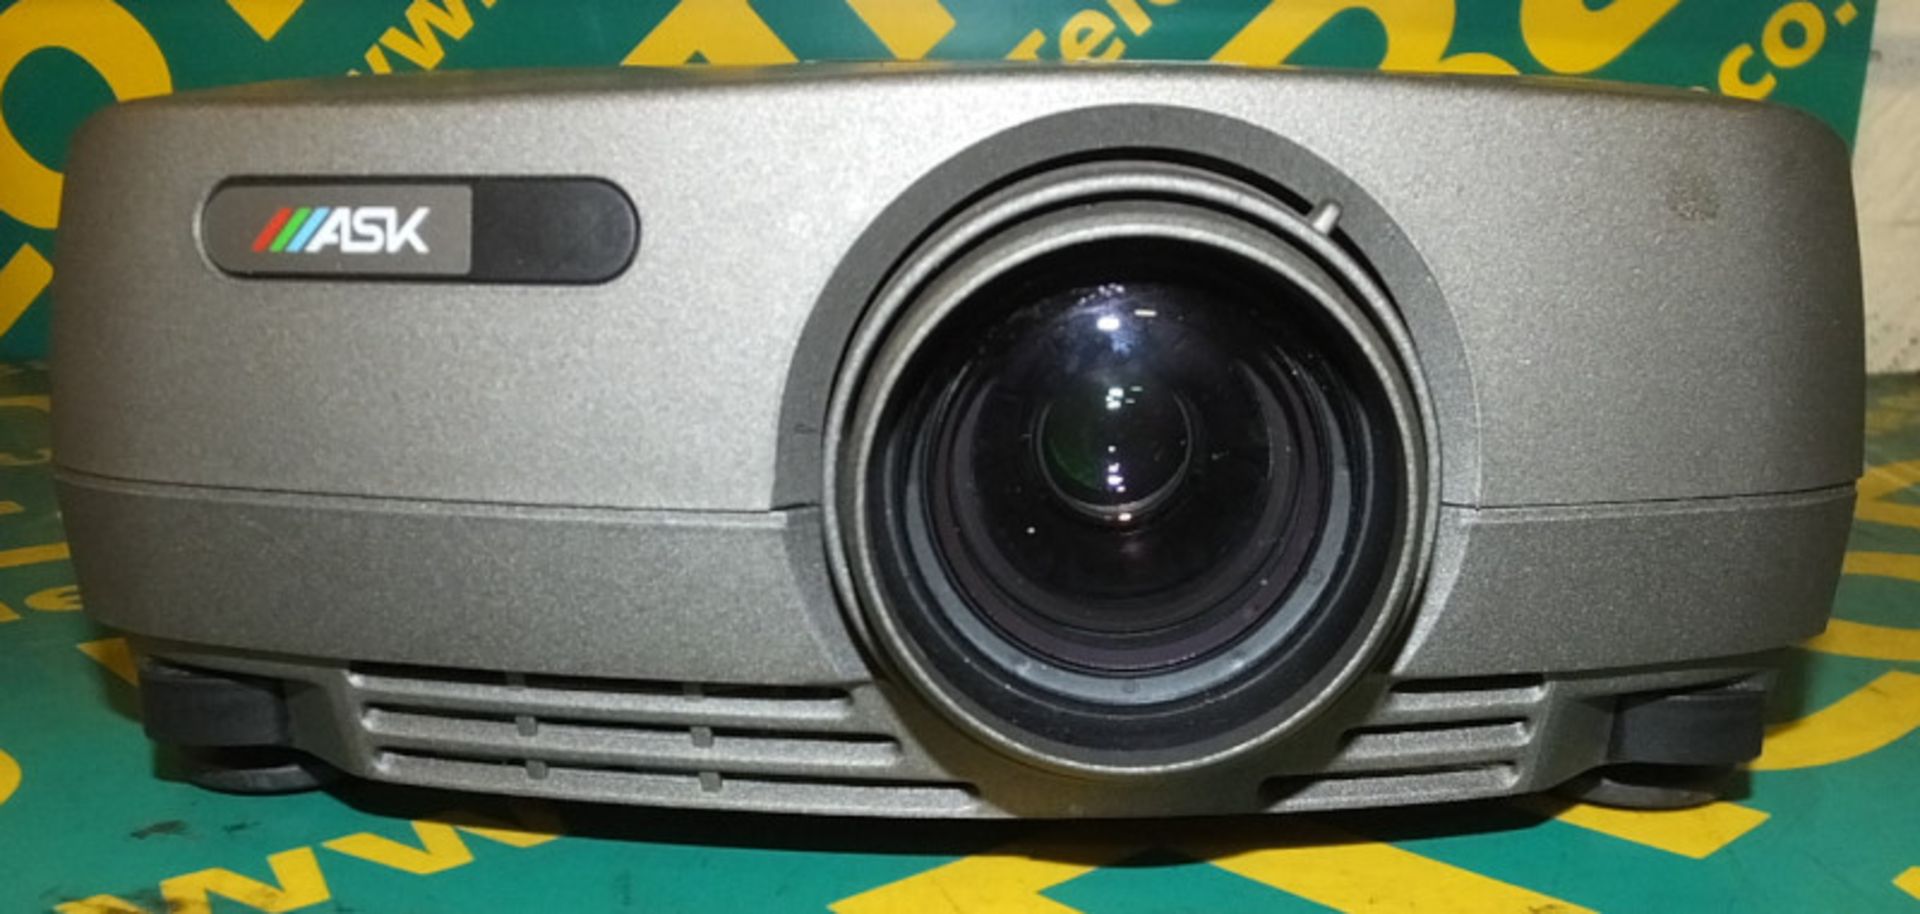 ASK C90 DVI Projector In A Case - Image 3 of 9